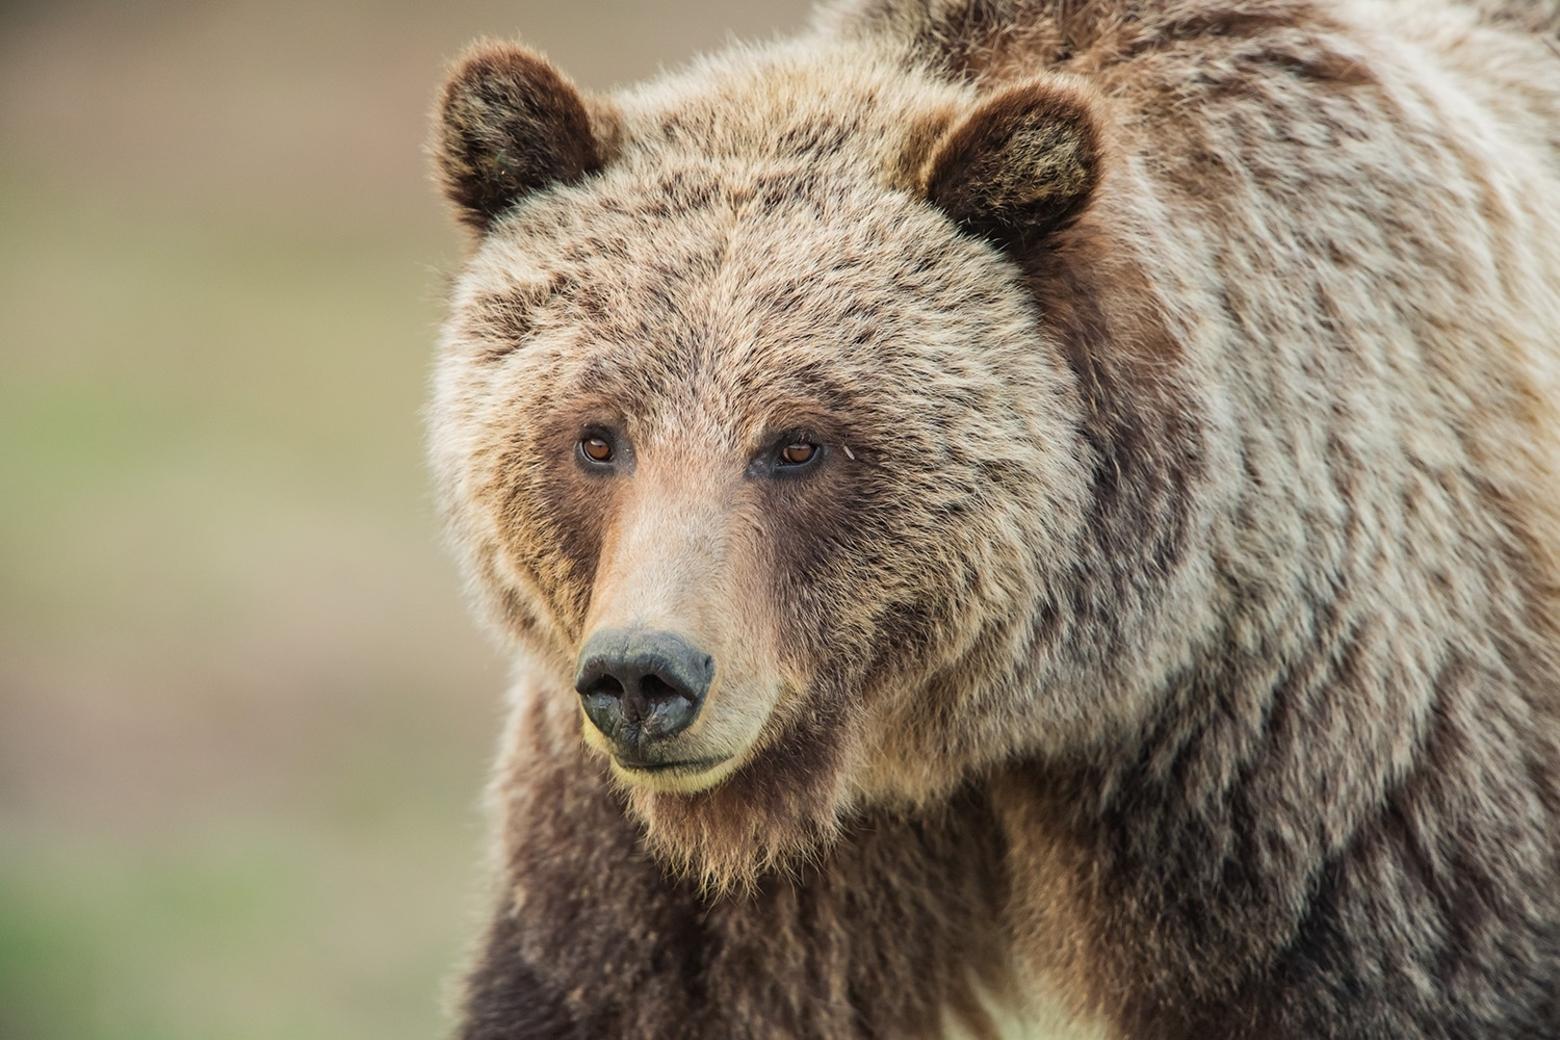 The surival of grizzlies in Greater Yellowstone depends more on the behavior of bears rather than people. Photo by Thomas D. Mangelsen (mangelsen.com)